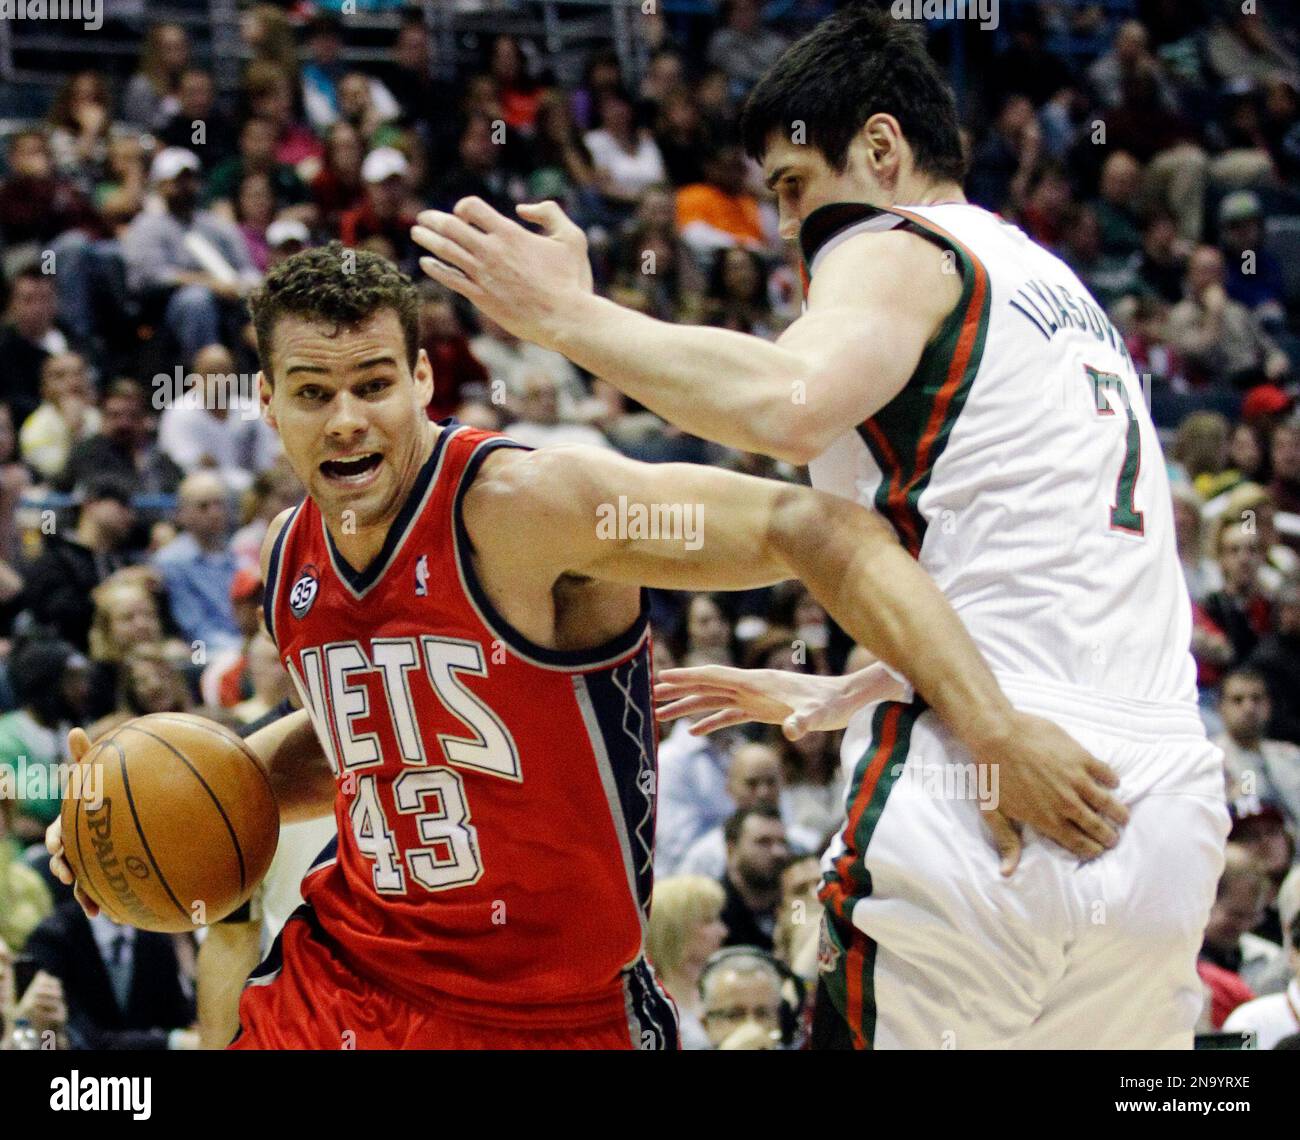 Photo: New Jersey Nets Kris Humphries at Madison Square Garden in